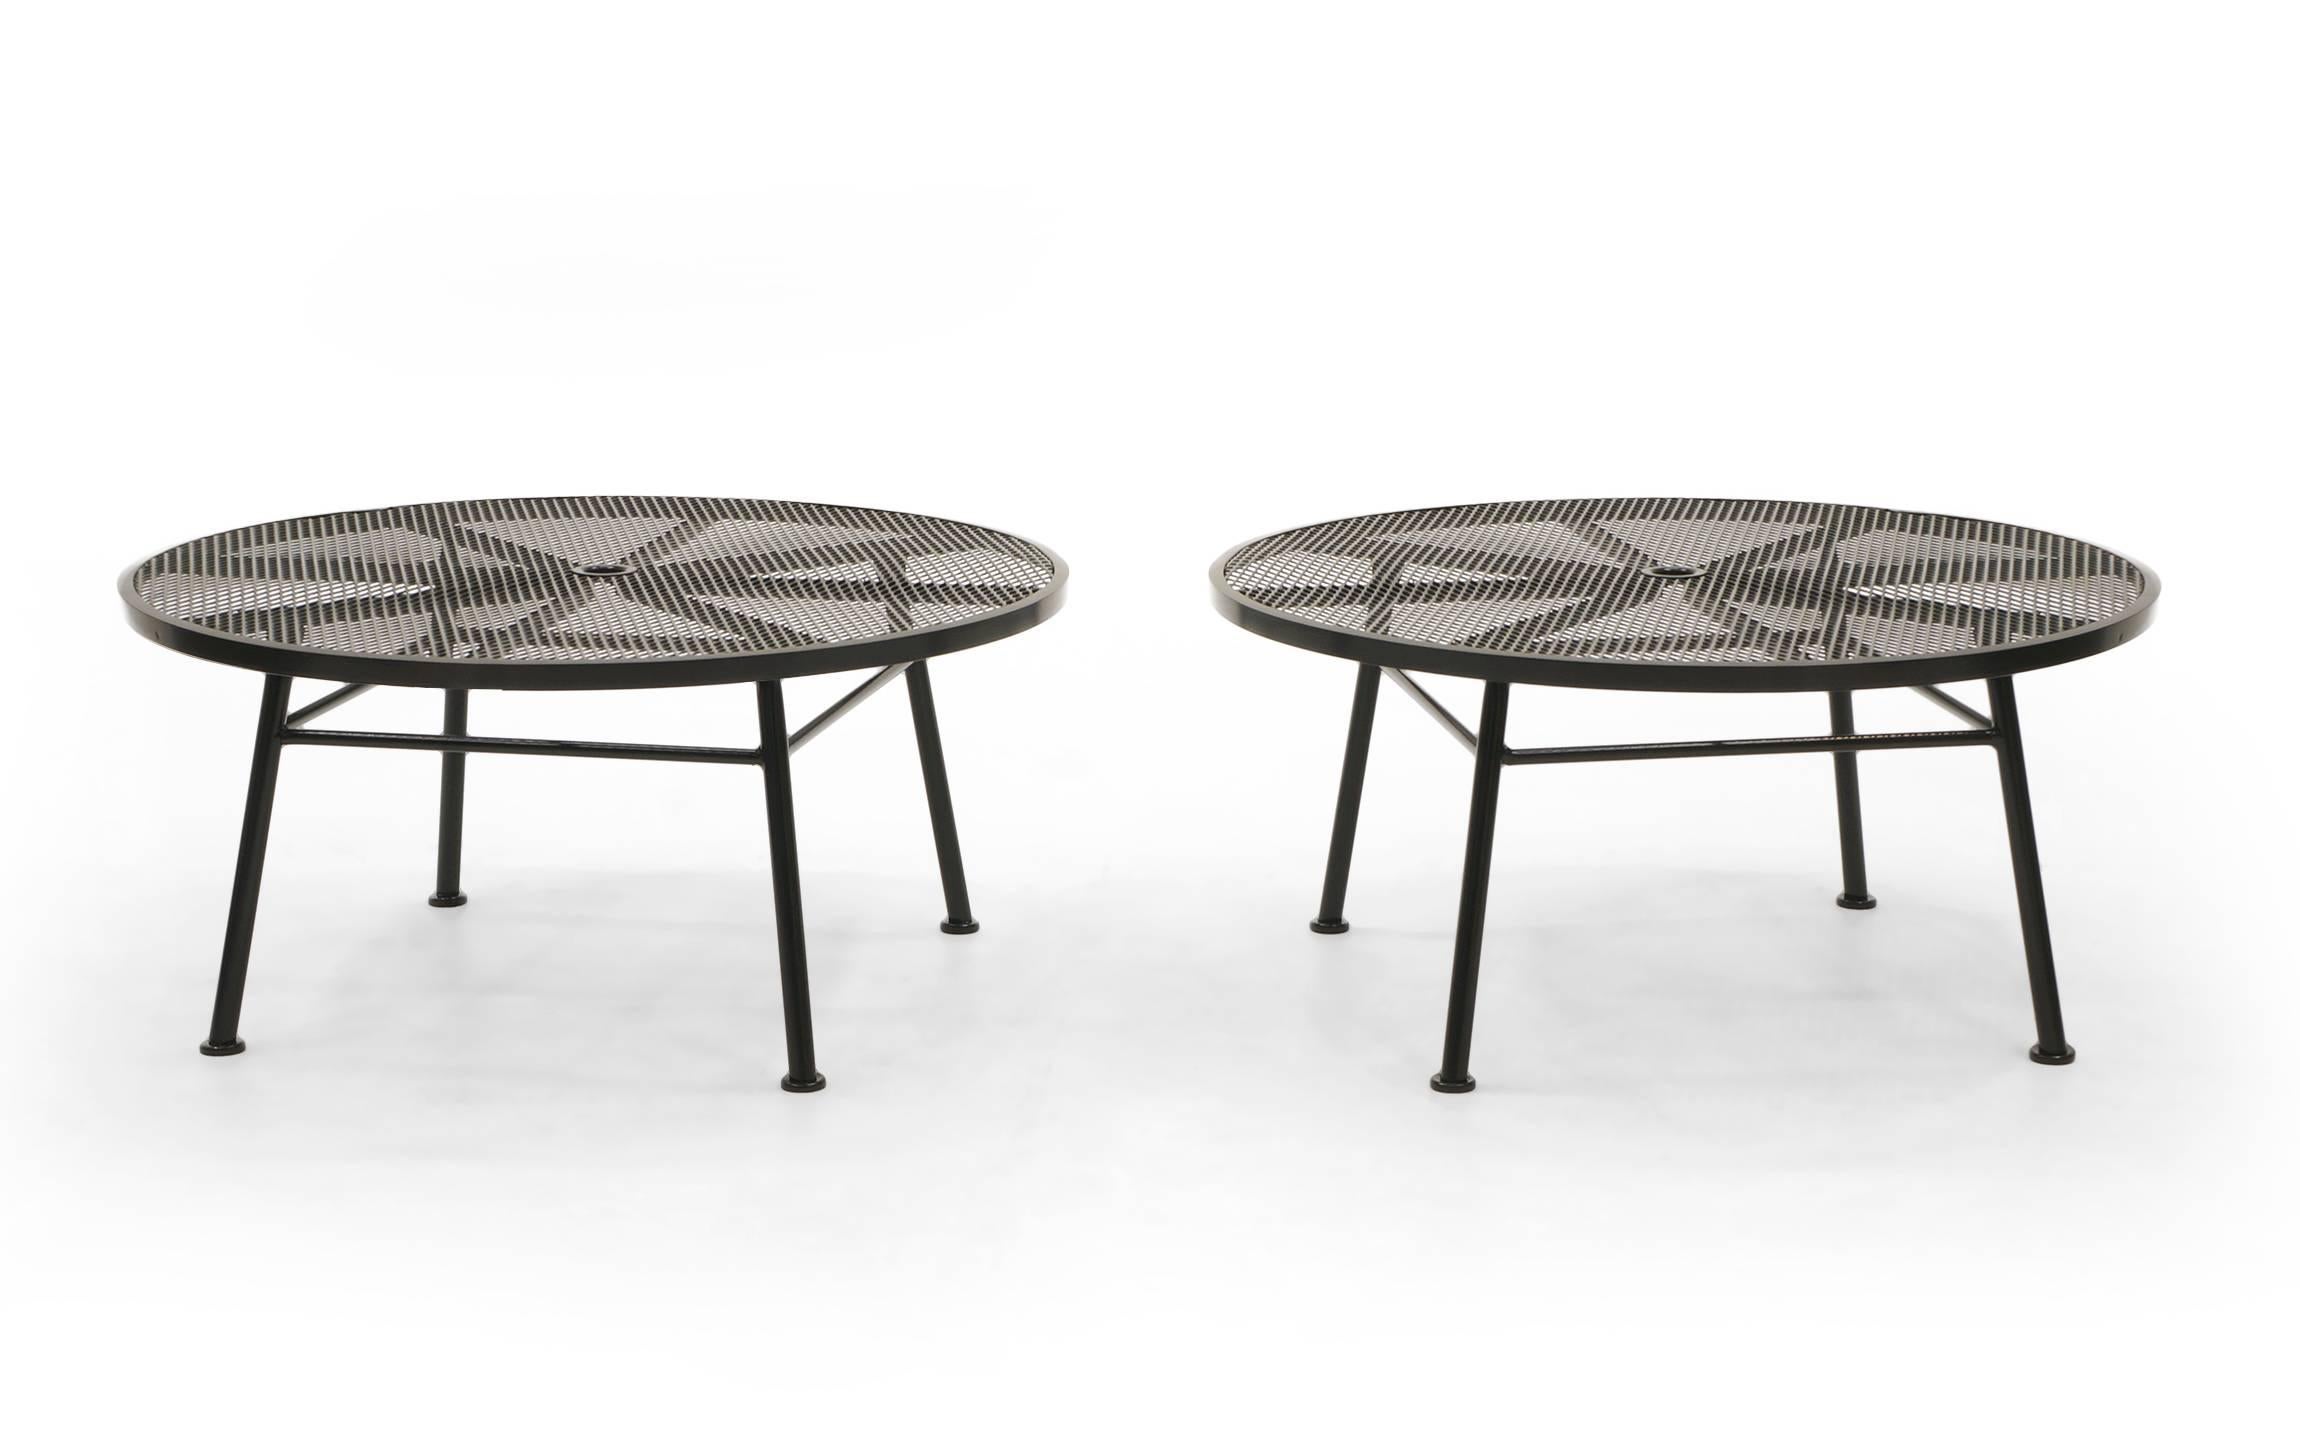 Outdoor coffee tables by Russell Woodard. There is a pair in the listing, but price is for each. These have been expertly media blasted and powder coated in a smooth satin black finish.